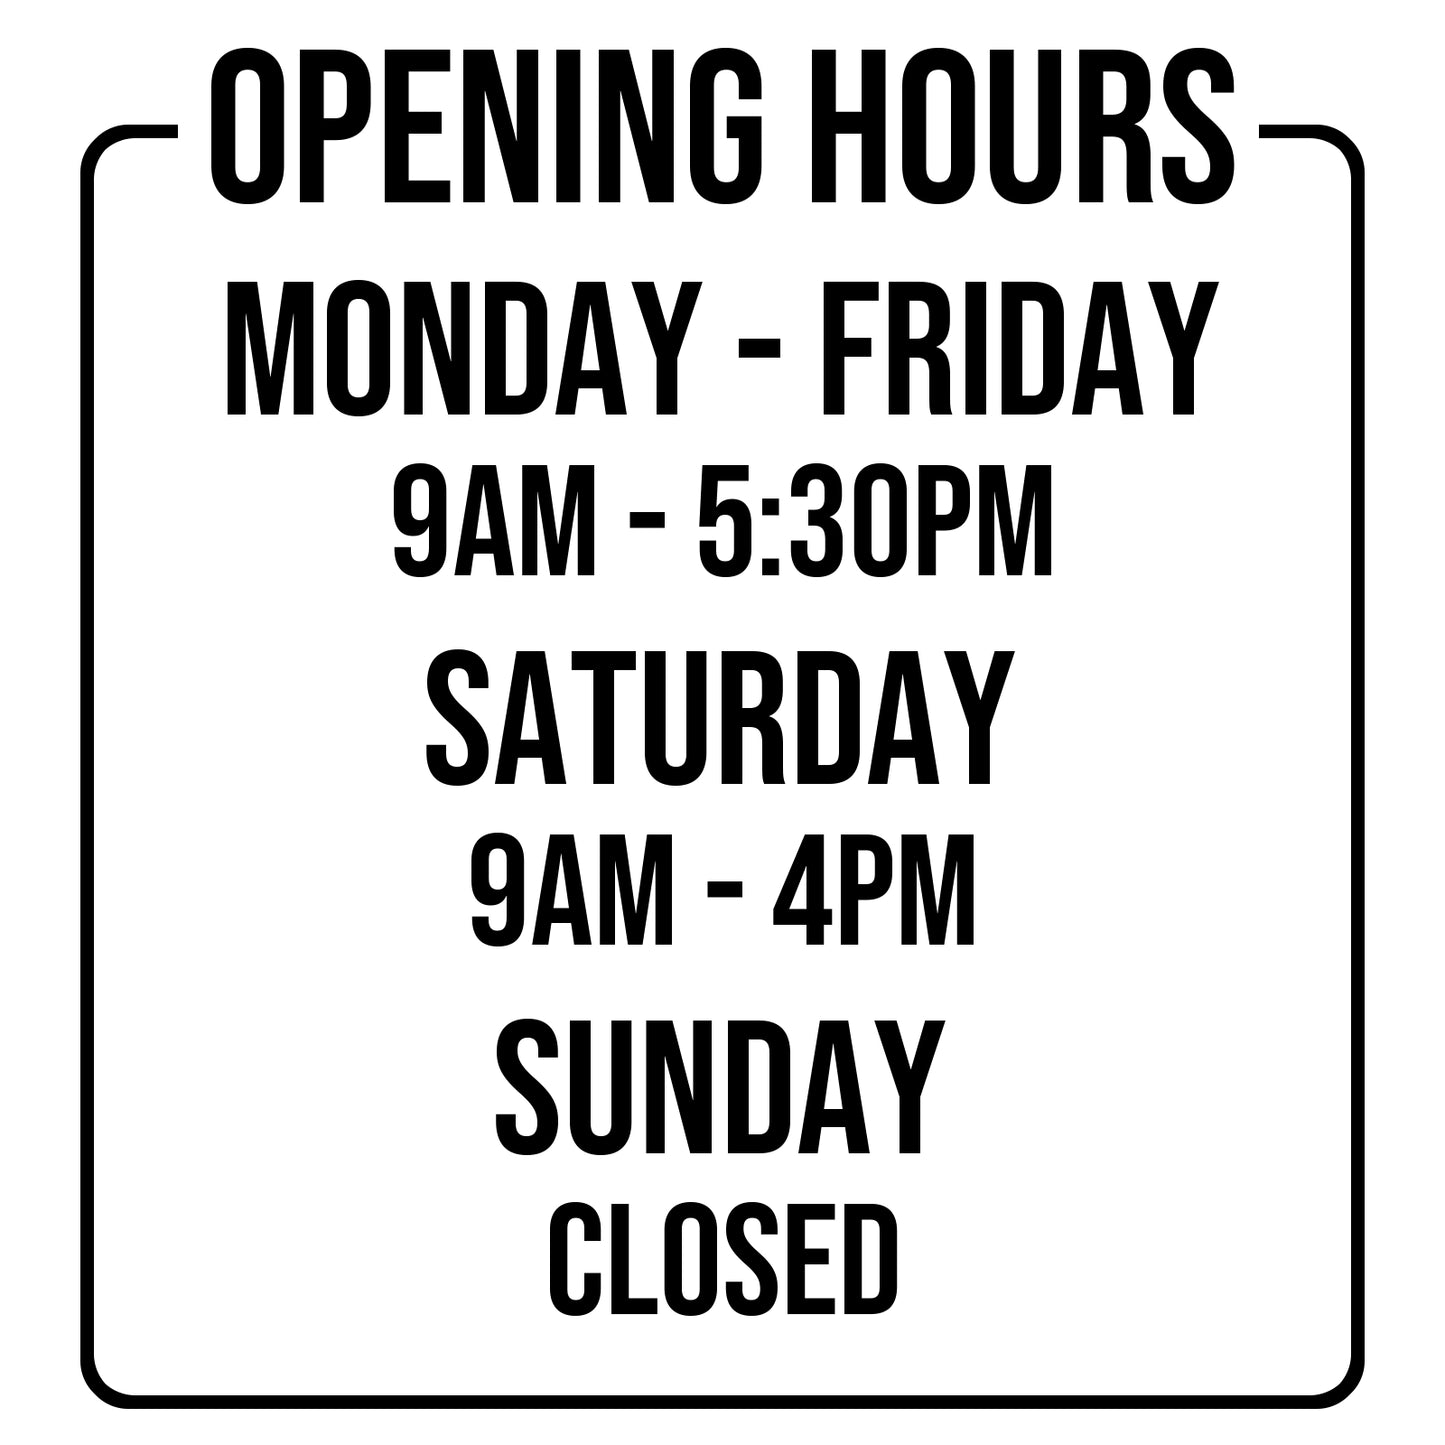 Opening Times for Shop Business Window in Black